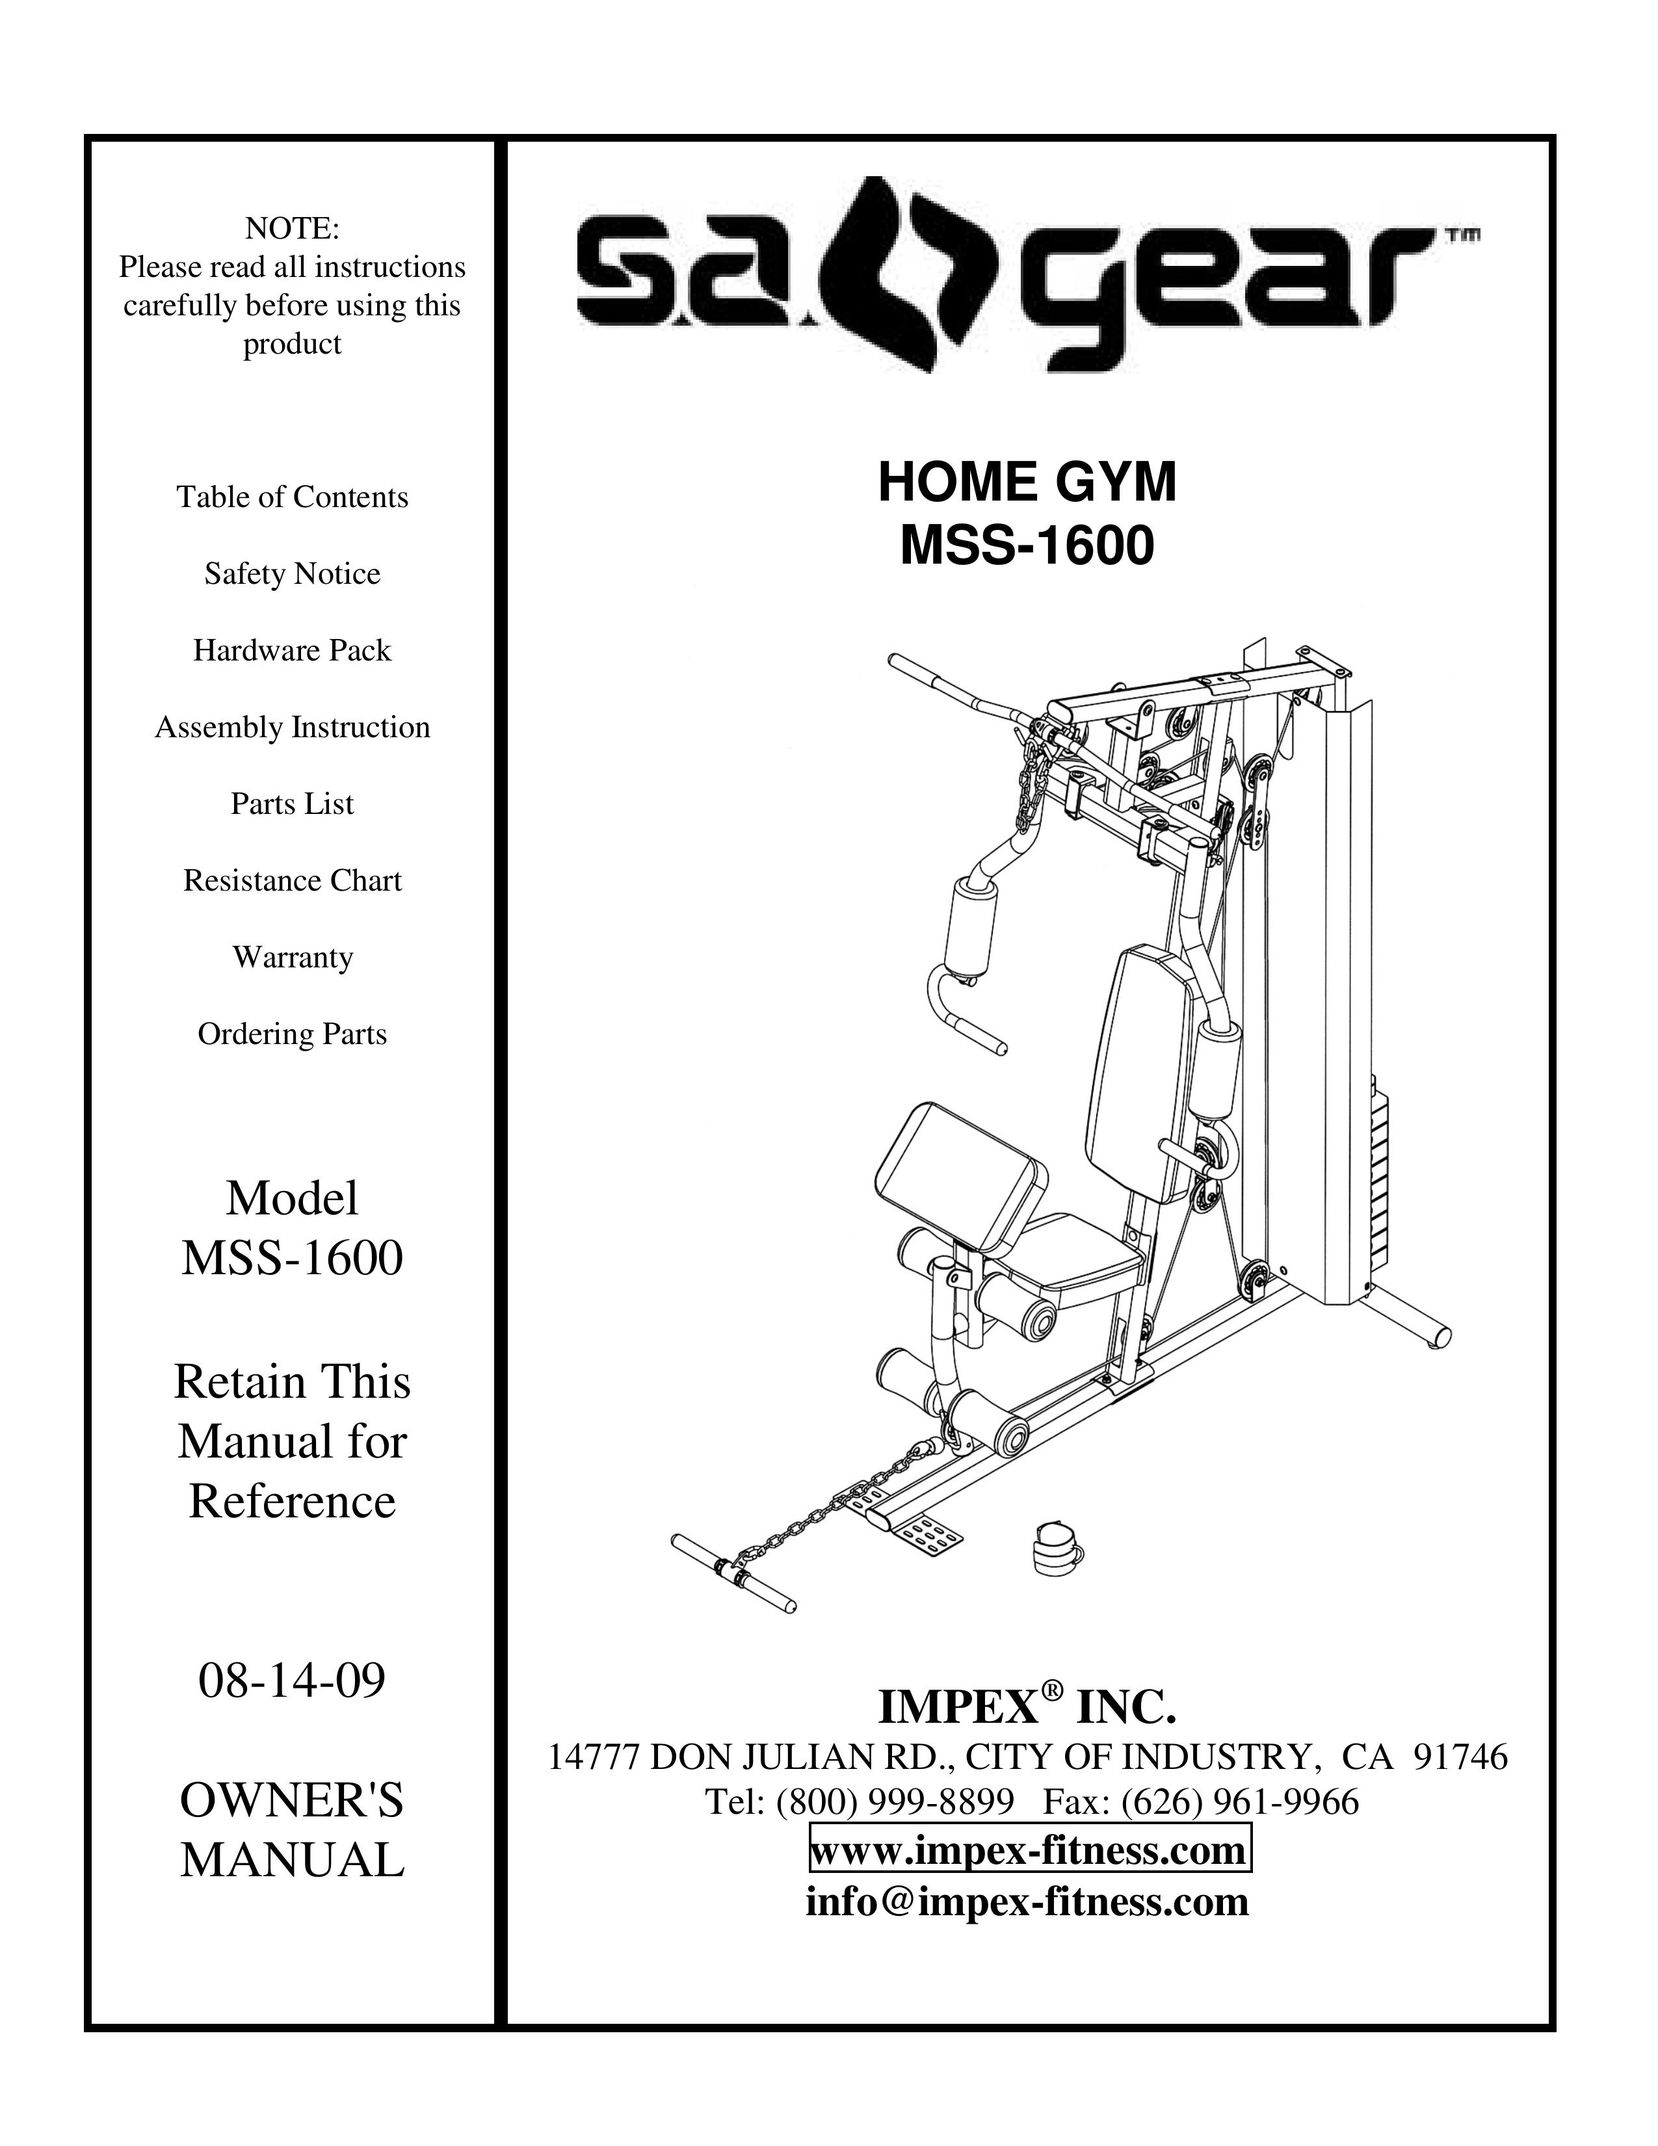 Impex MSS-1600 Fitness Equipment User Manual